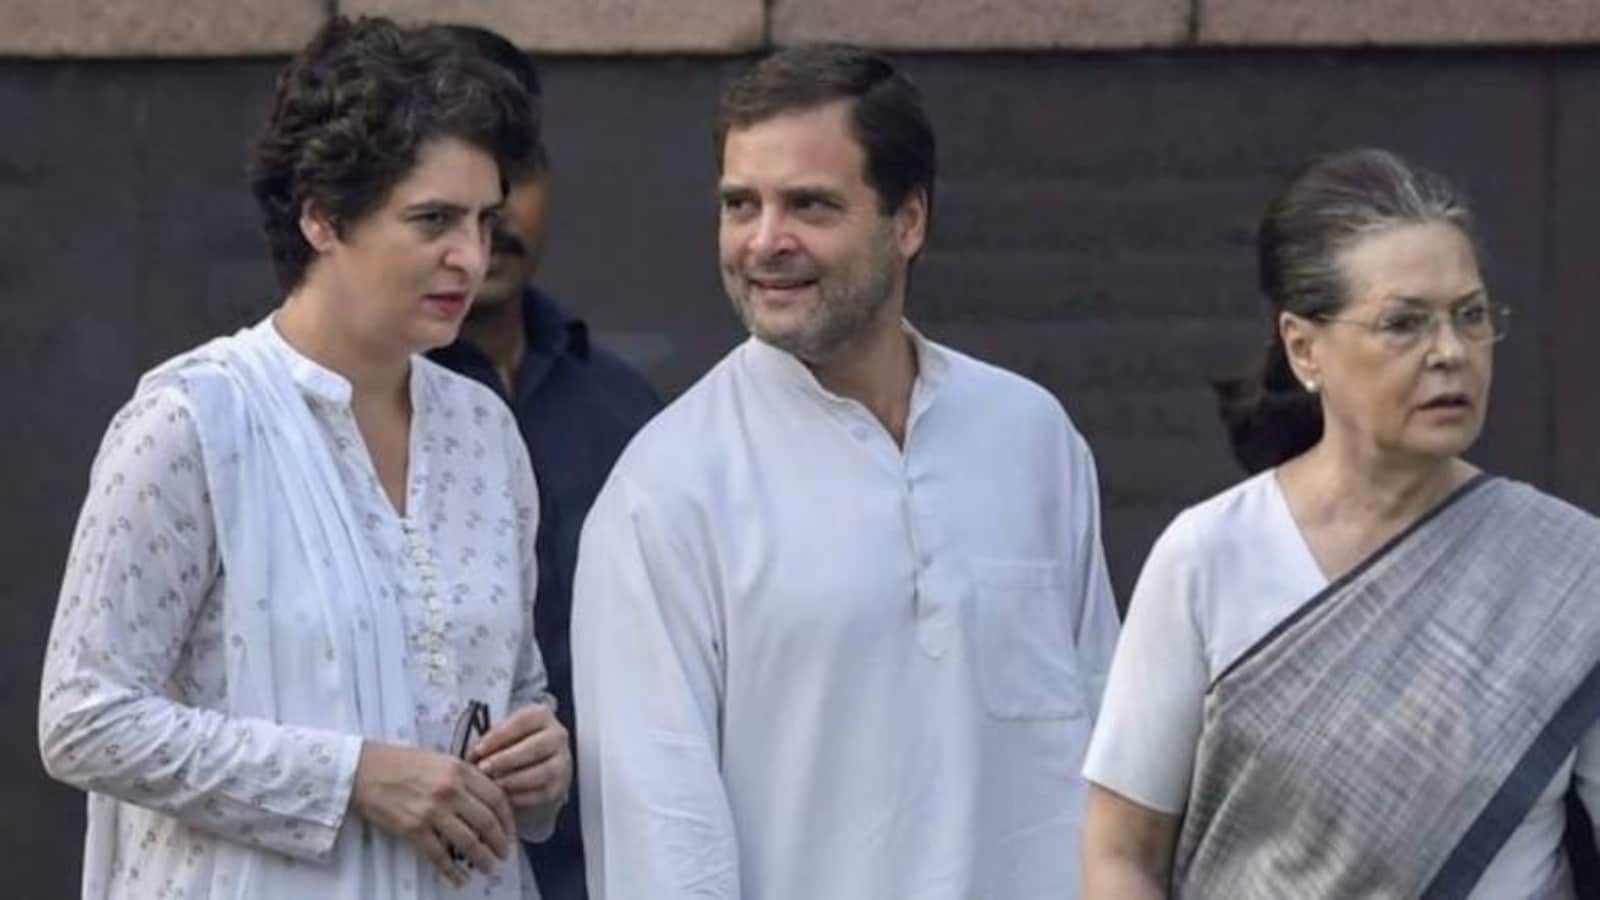 So proud of you, Ma': As Sonia Gandhi passes on Congress leadership, messages from Rahul, Priyanka